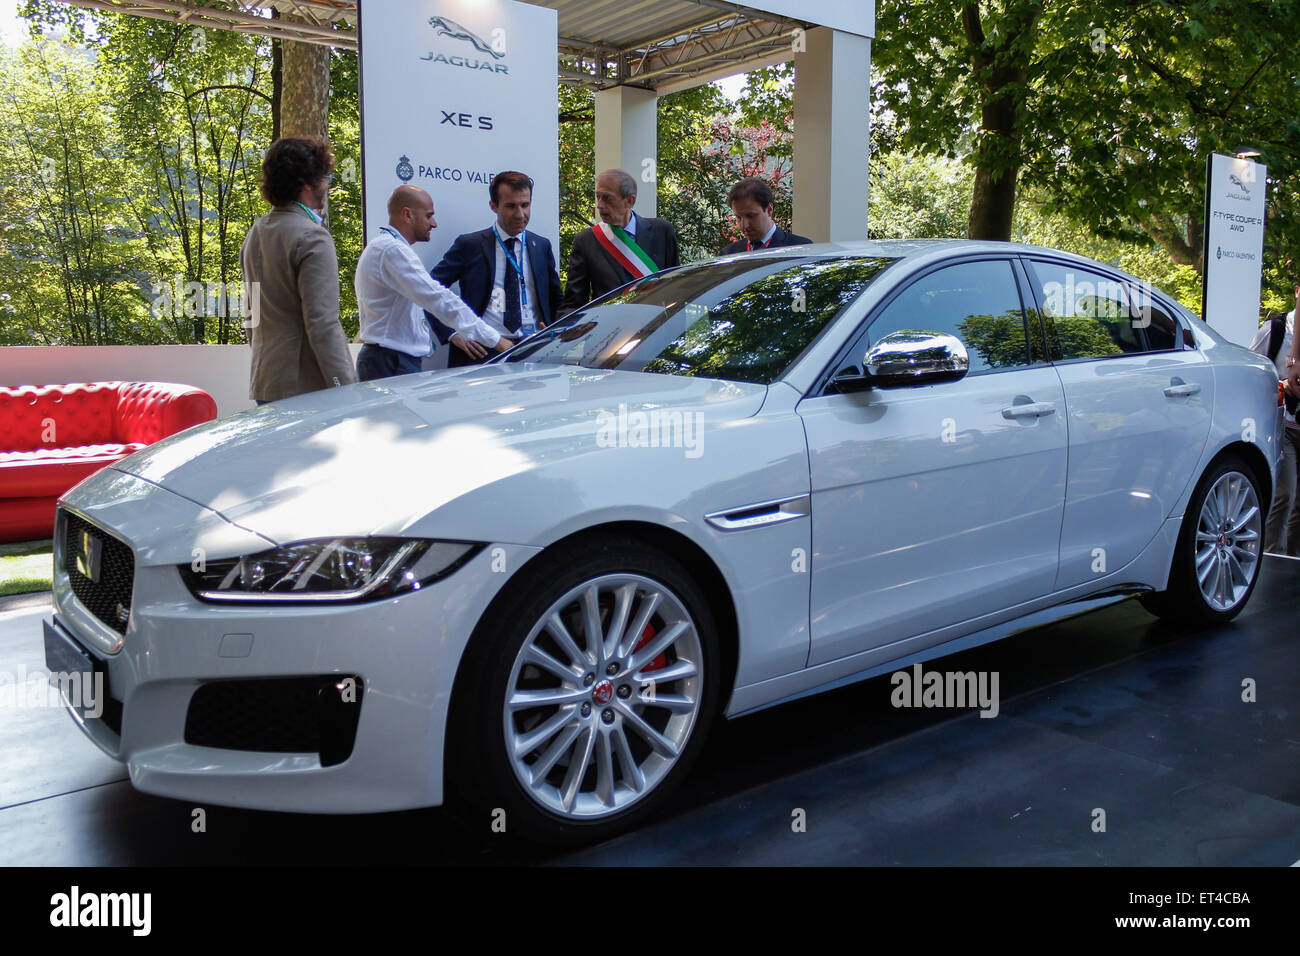 Turin, Italy. 11th June, 2015. First edition for 'Parco Valentino - Hall & Grand Prix'. At the stand Jaguar XE S the Mayor Piero Fassino, the entrepreneur Turin Andrea Levy and Alderman Roads and Transportation of the City of Turin Claudio Lubatti. Credit:  Elena Aquila/Pacific Press /Alamy Live News Stock Photo